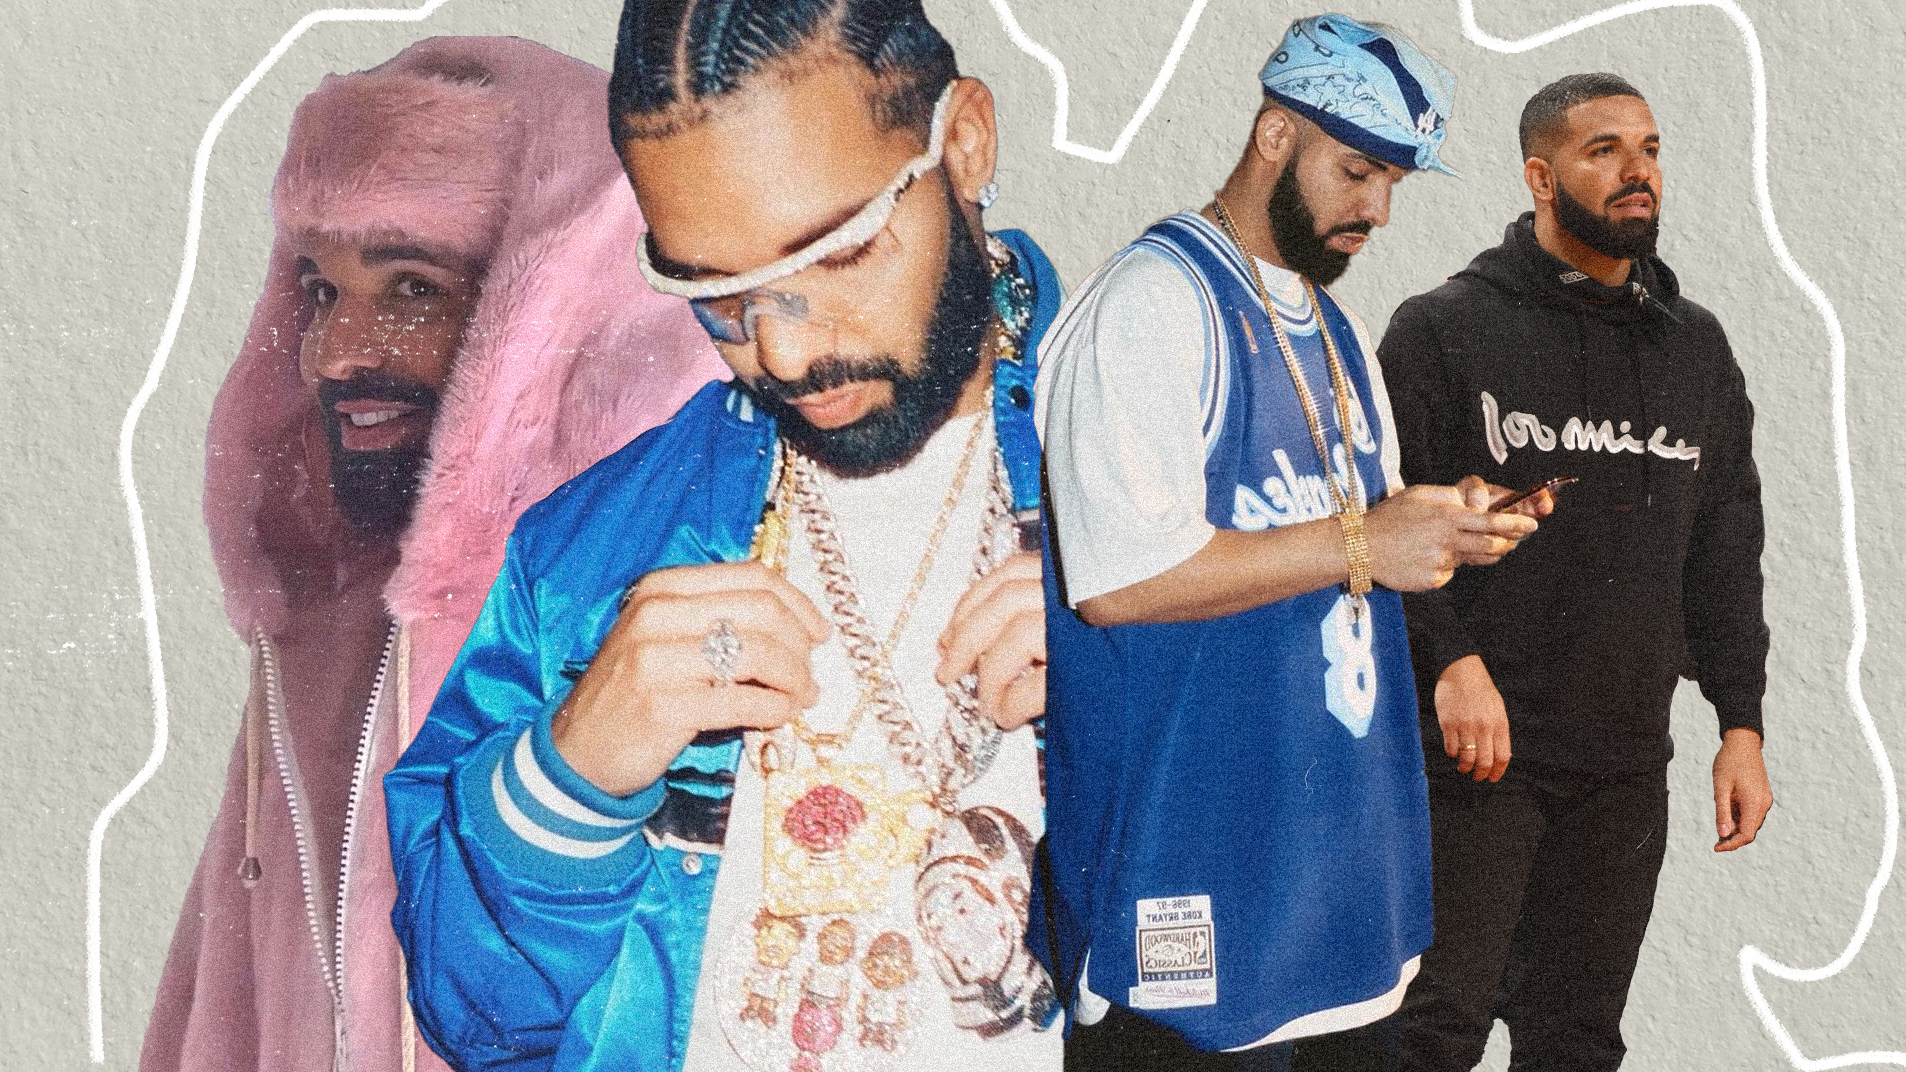 Drake Wore Almost $3 Million Worth of Pharrell's Old Jewelry in the  'Jumbotron Sh*t Poppin' Video